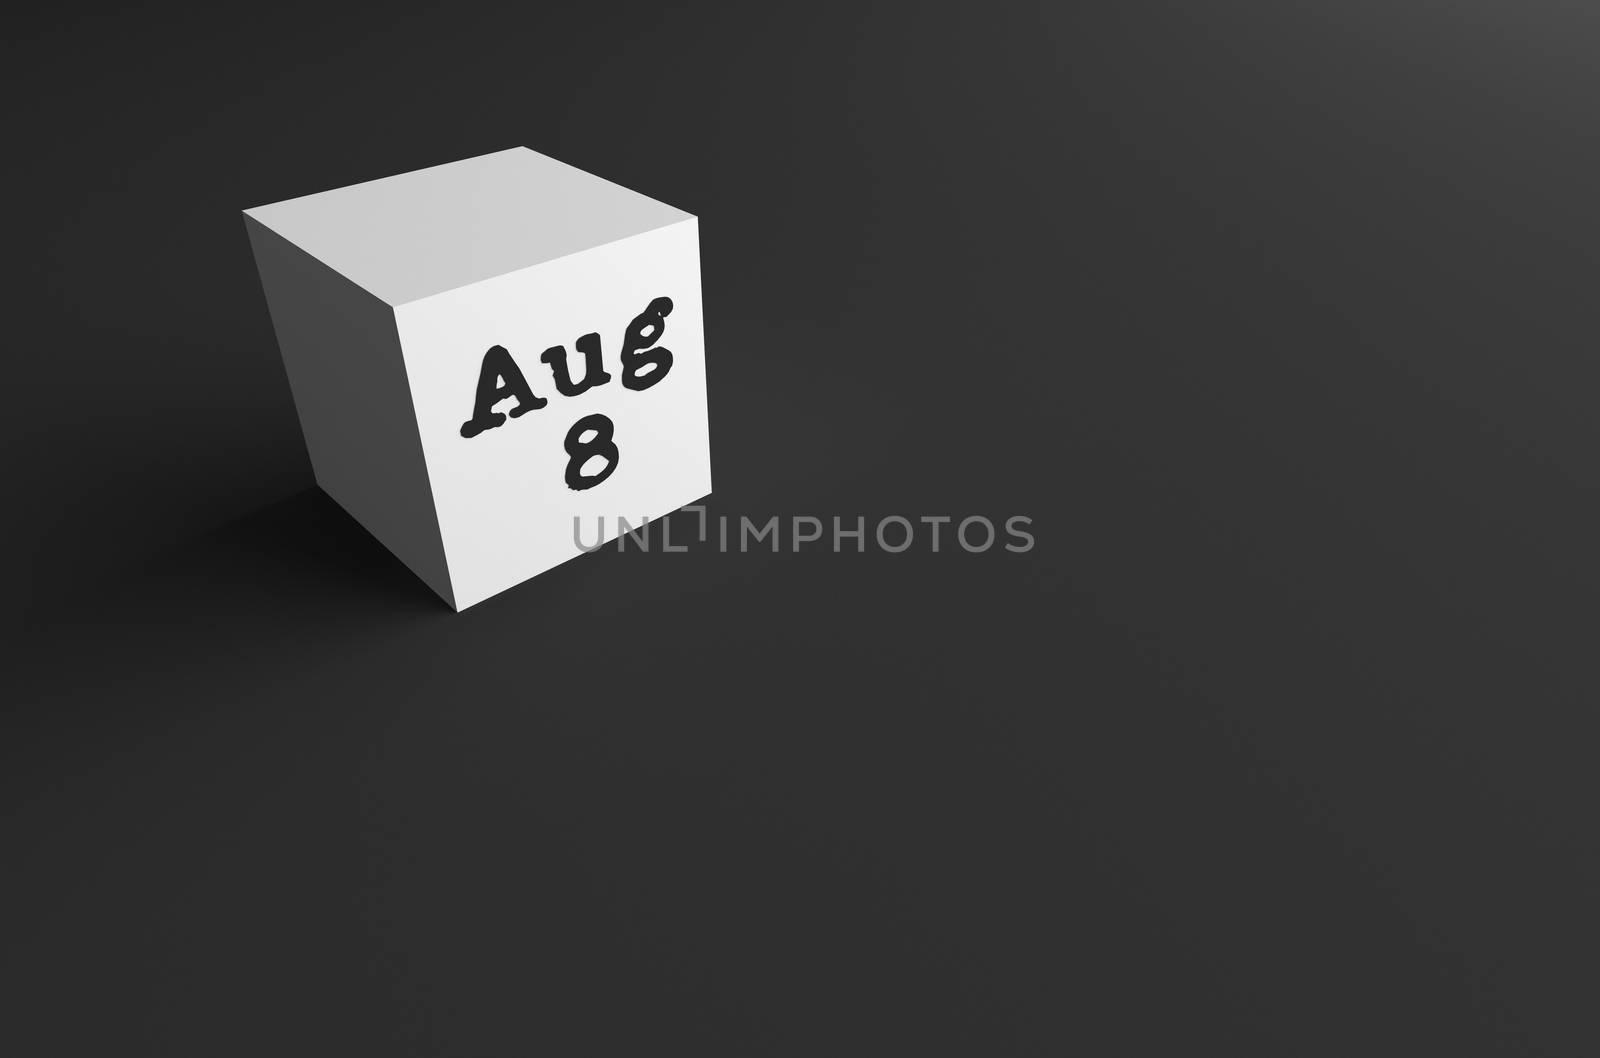 3D RENDERING OF Aug (ABBREVIATION OF AUGUST) 8 ON WHITE CUBE